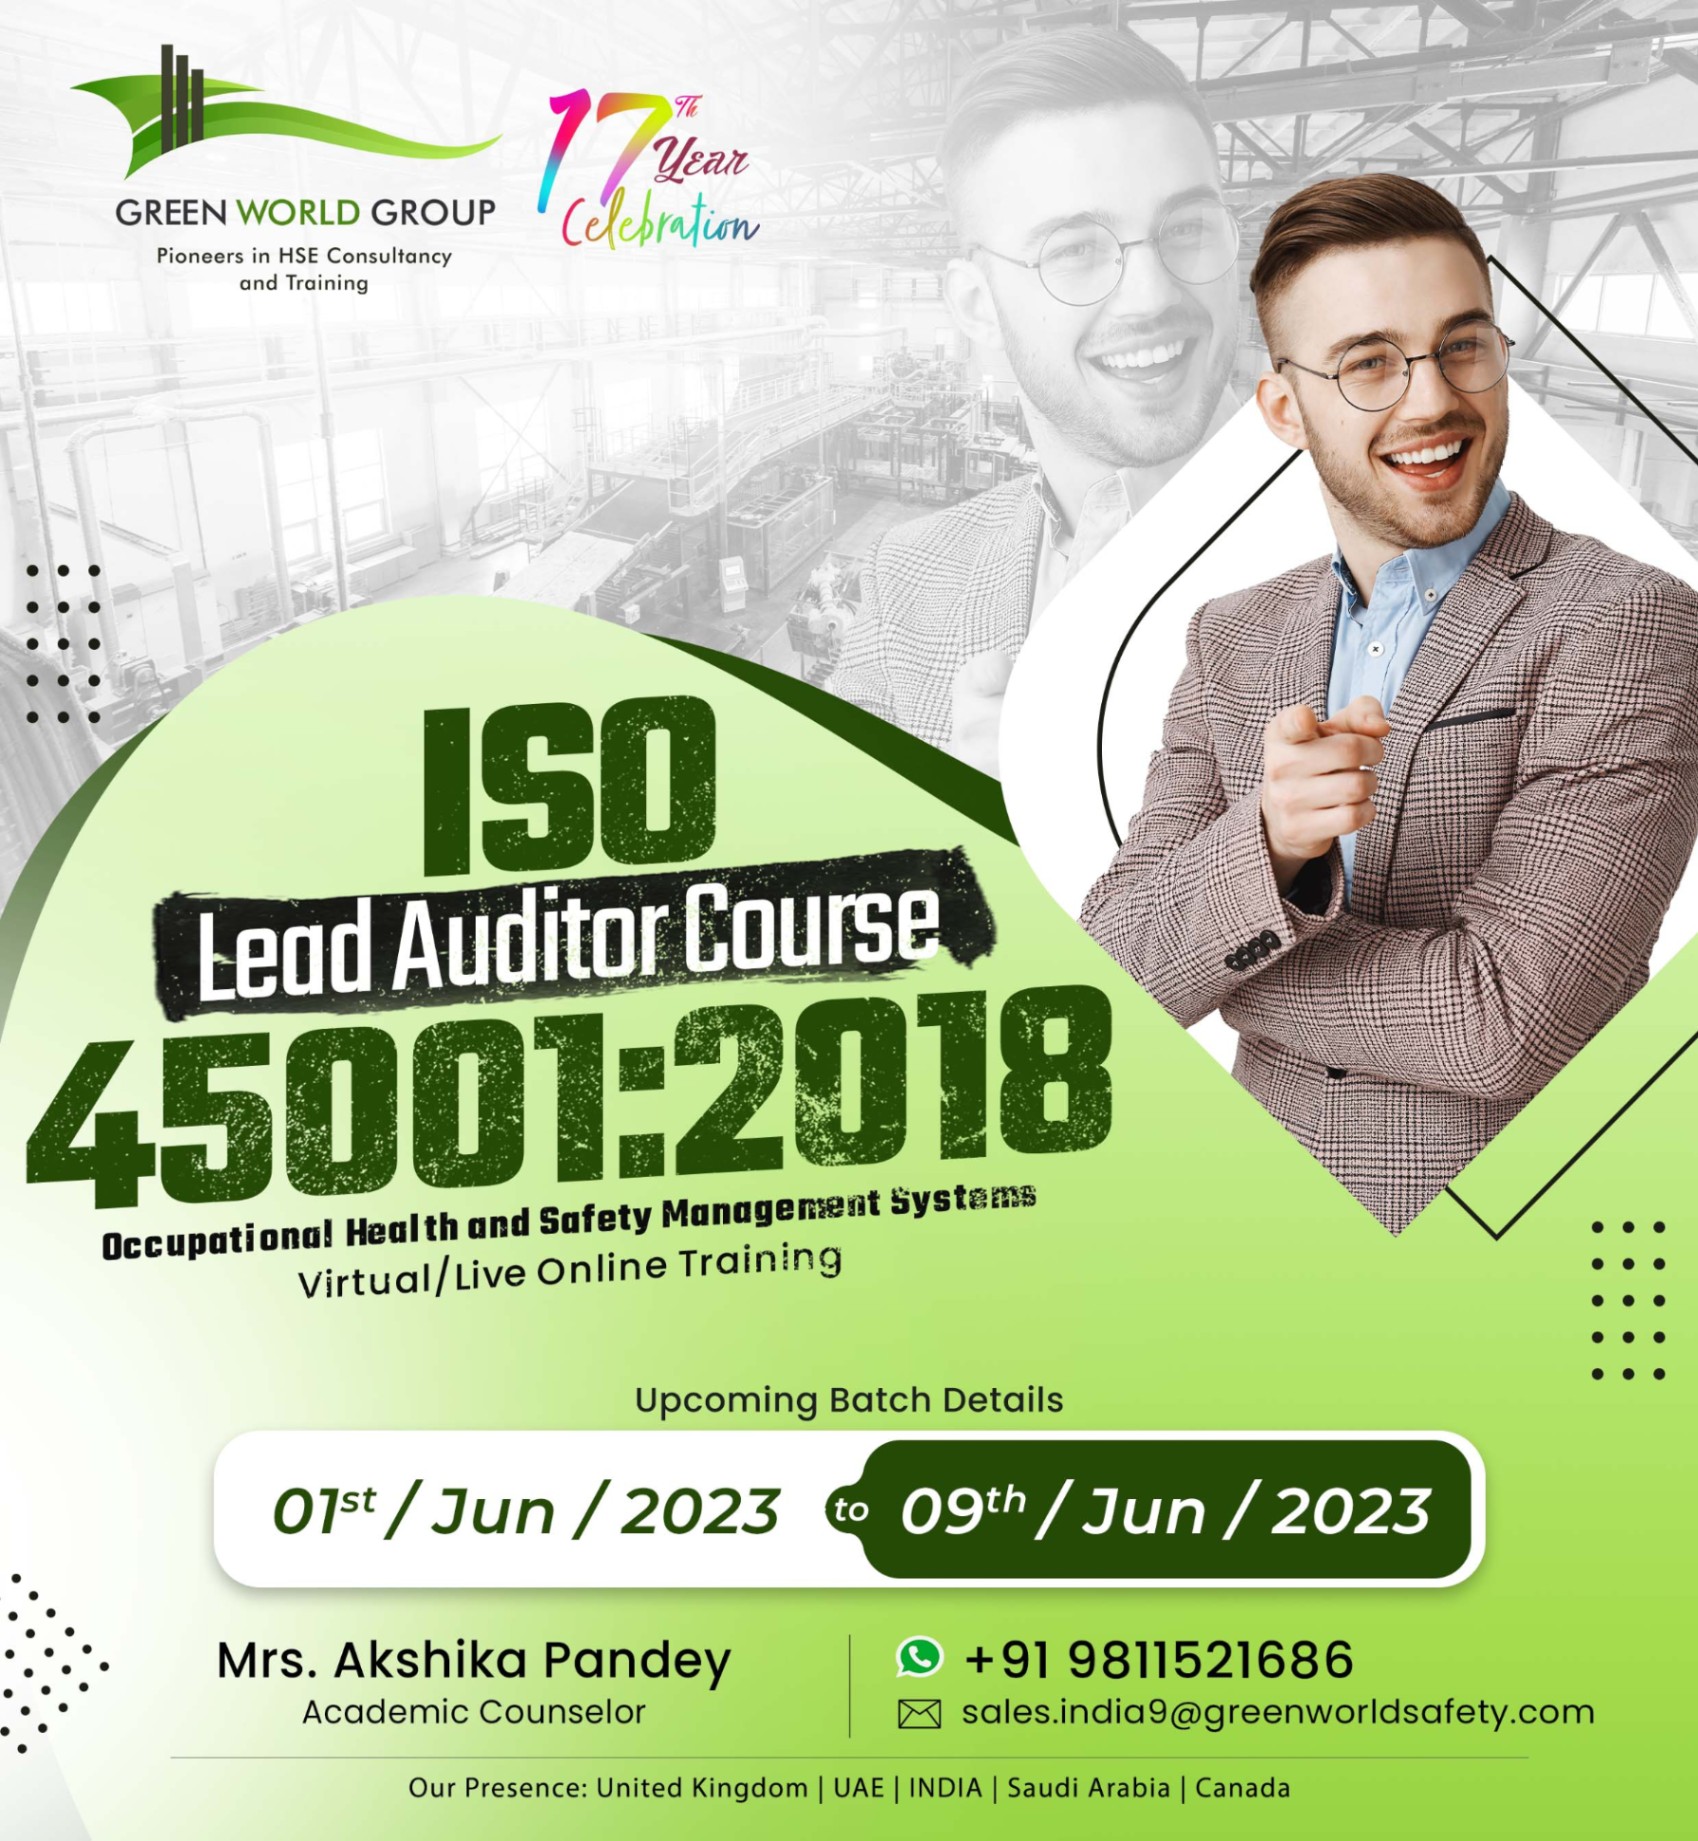 "Be an ISO Lead Auditor and Pave the Way for Excellence in Safety!"